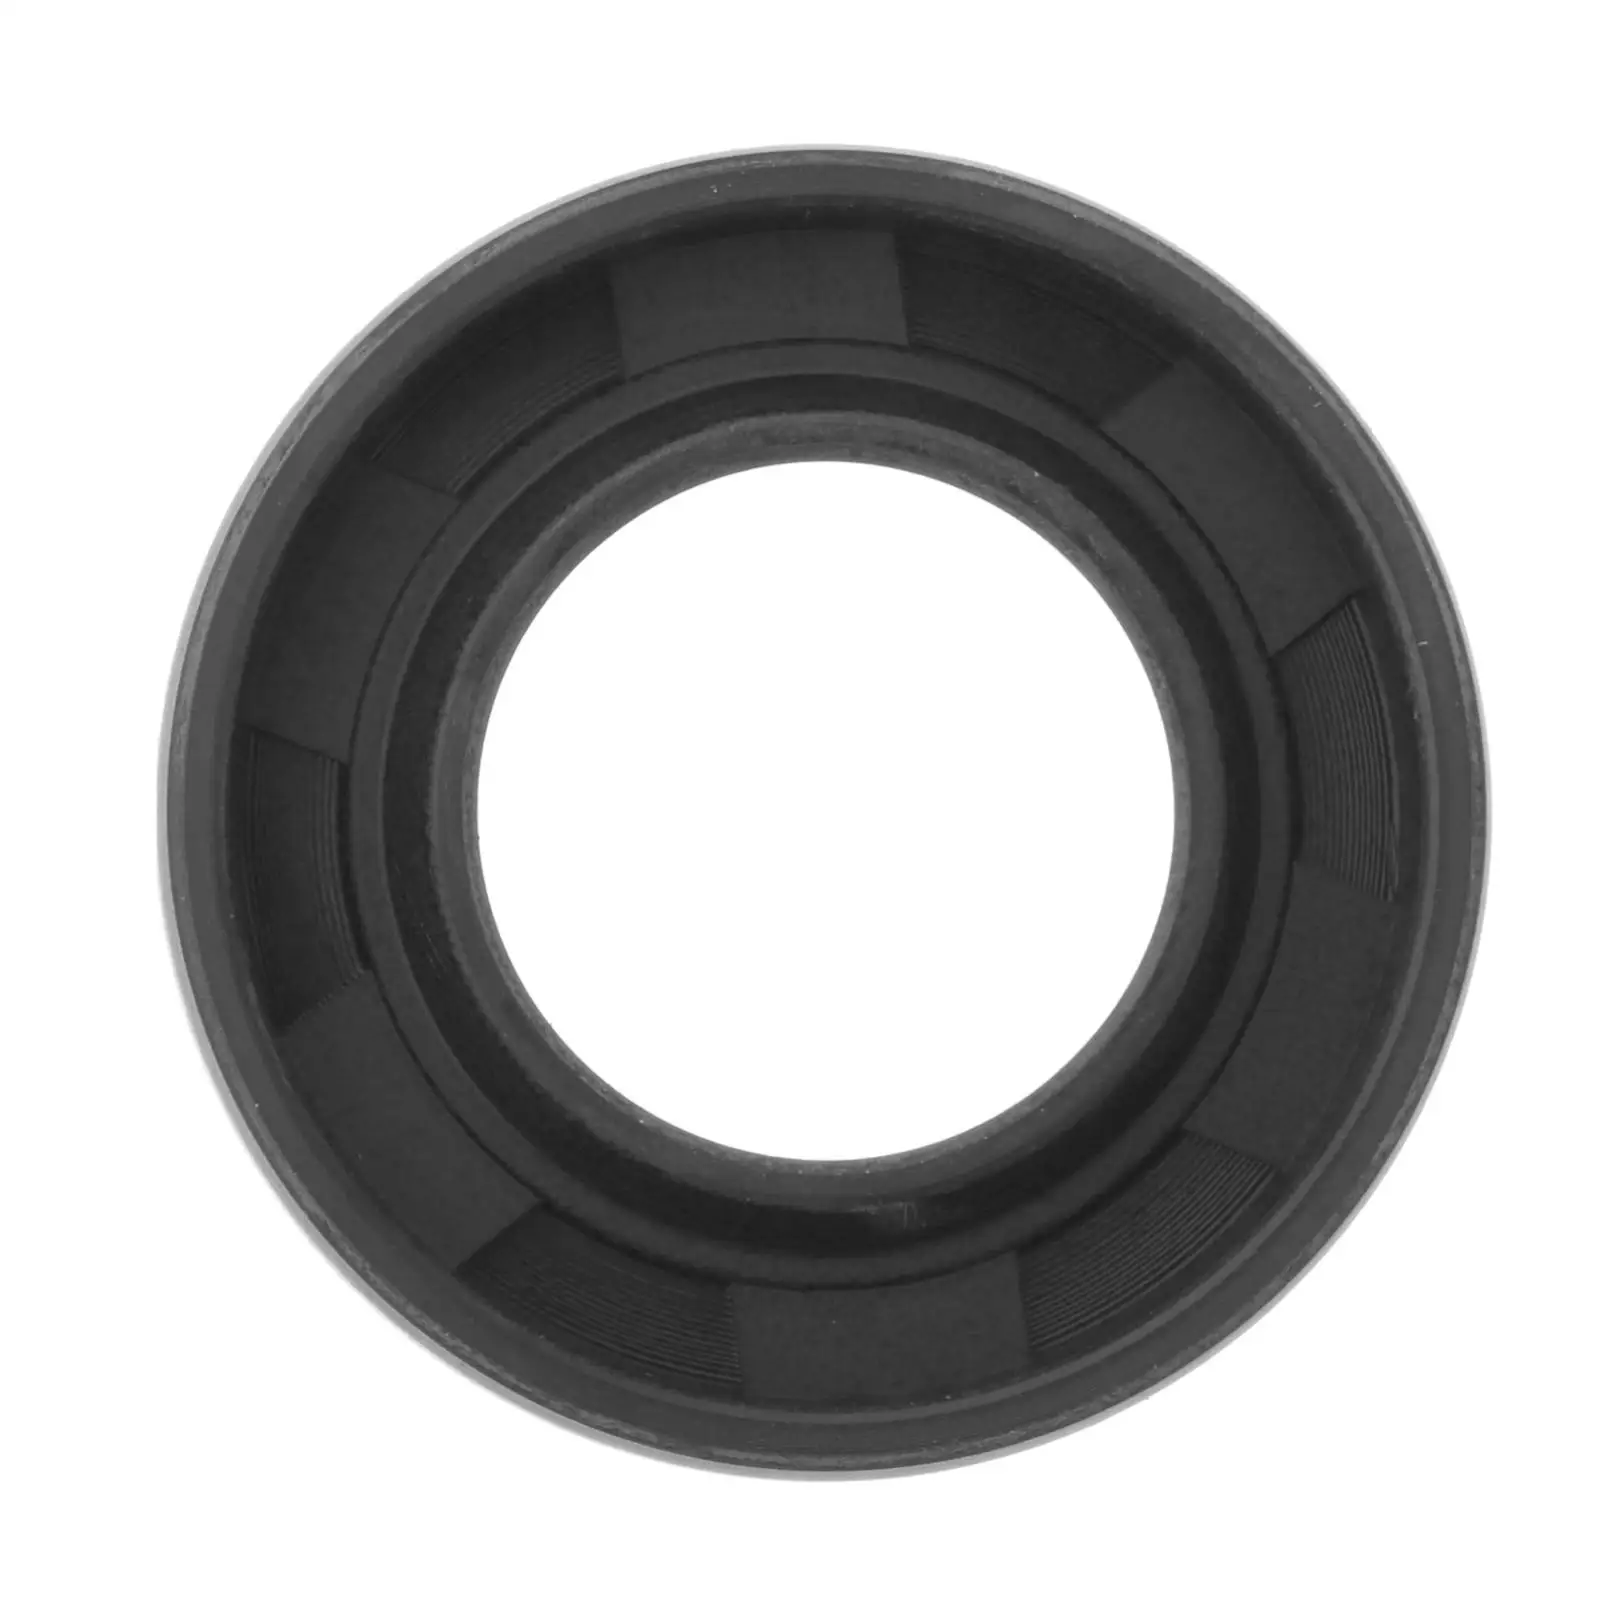 Boat Motor Oil Seal Direct Replaces 93106-18M01 Fit for Yamaha Outboard Motor 60HP 70HP 2T 3cyl Outboard Engine